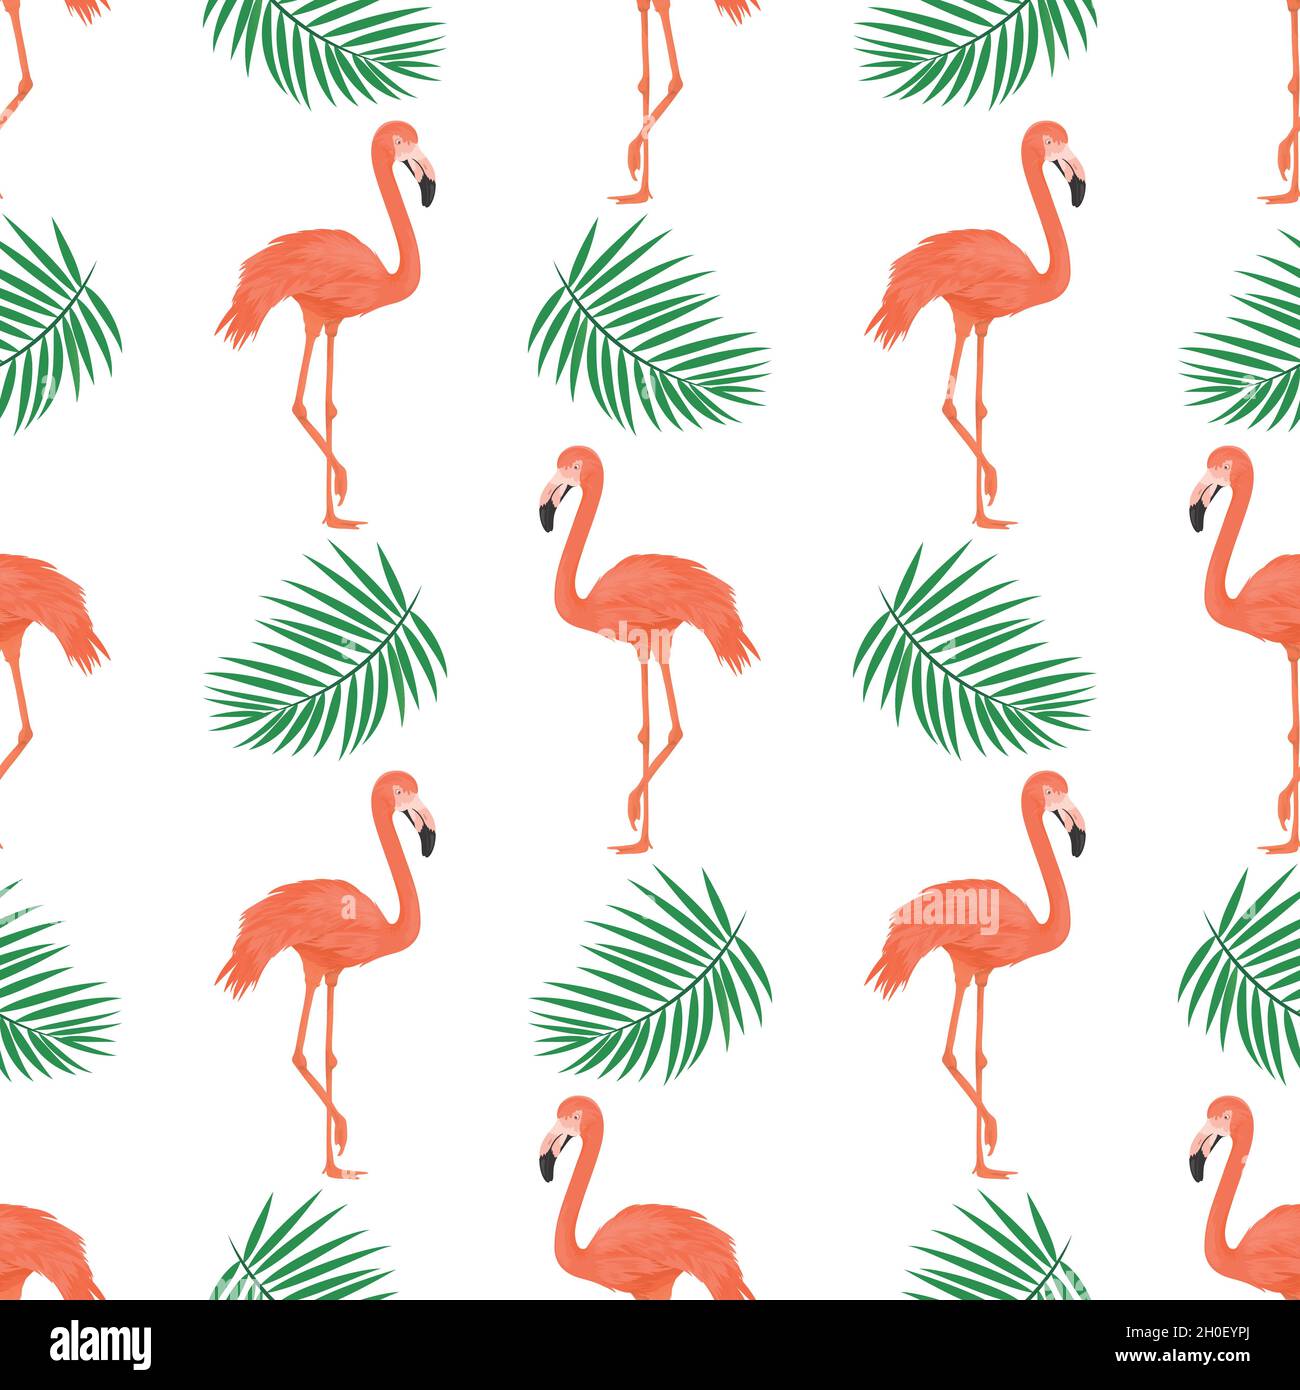 Seamless Pattern with Flamingo Bird and Tropical Leaves. Repeated Tropical Background. Flat Vector Illustration. Africa, Savannh, Exotic, Summer Stock Vector